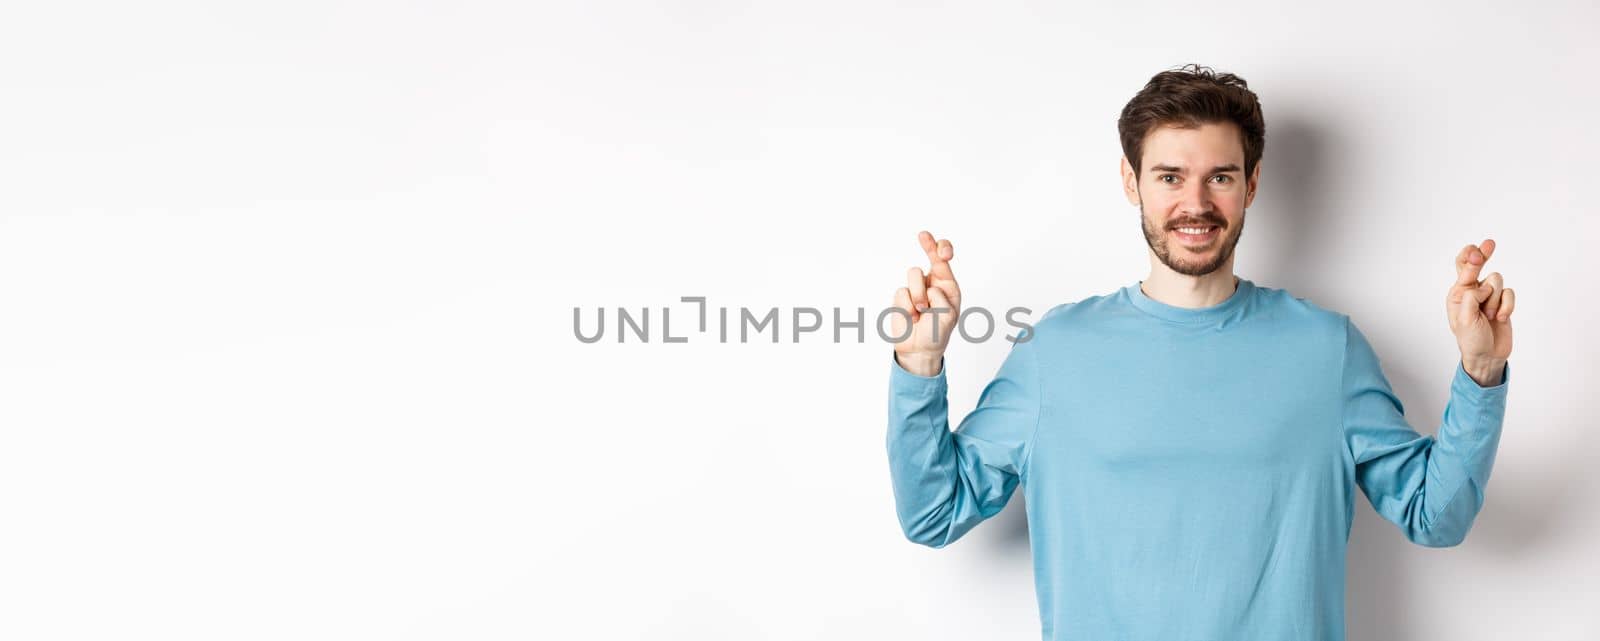 Optimistic smiling man cross fingers for good luck, making wish and waiting for results, standing over white background.